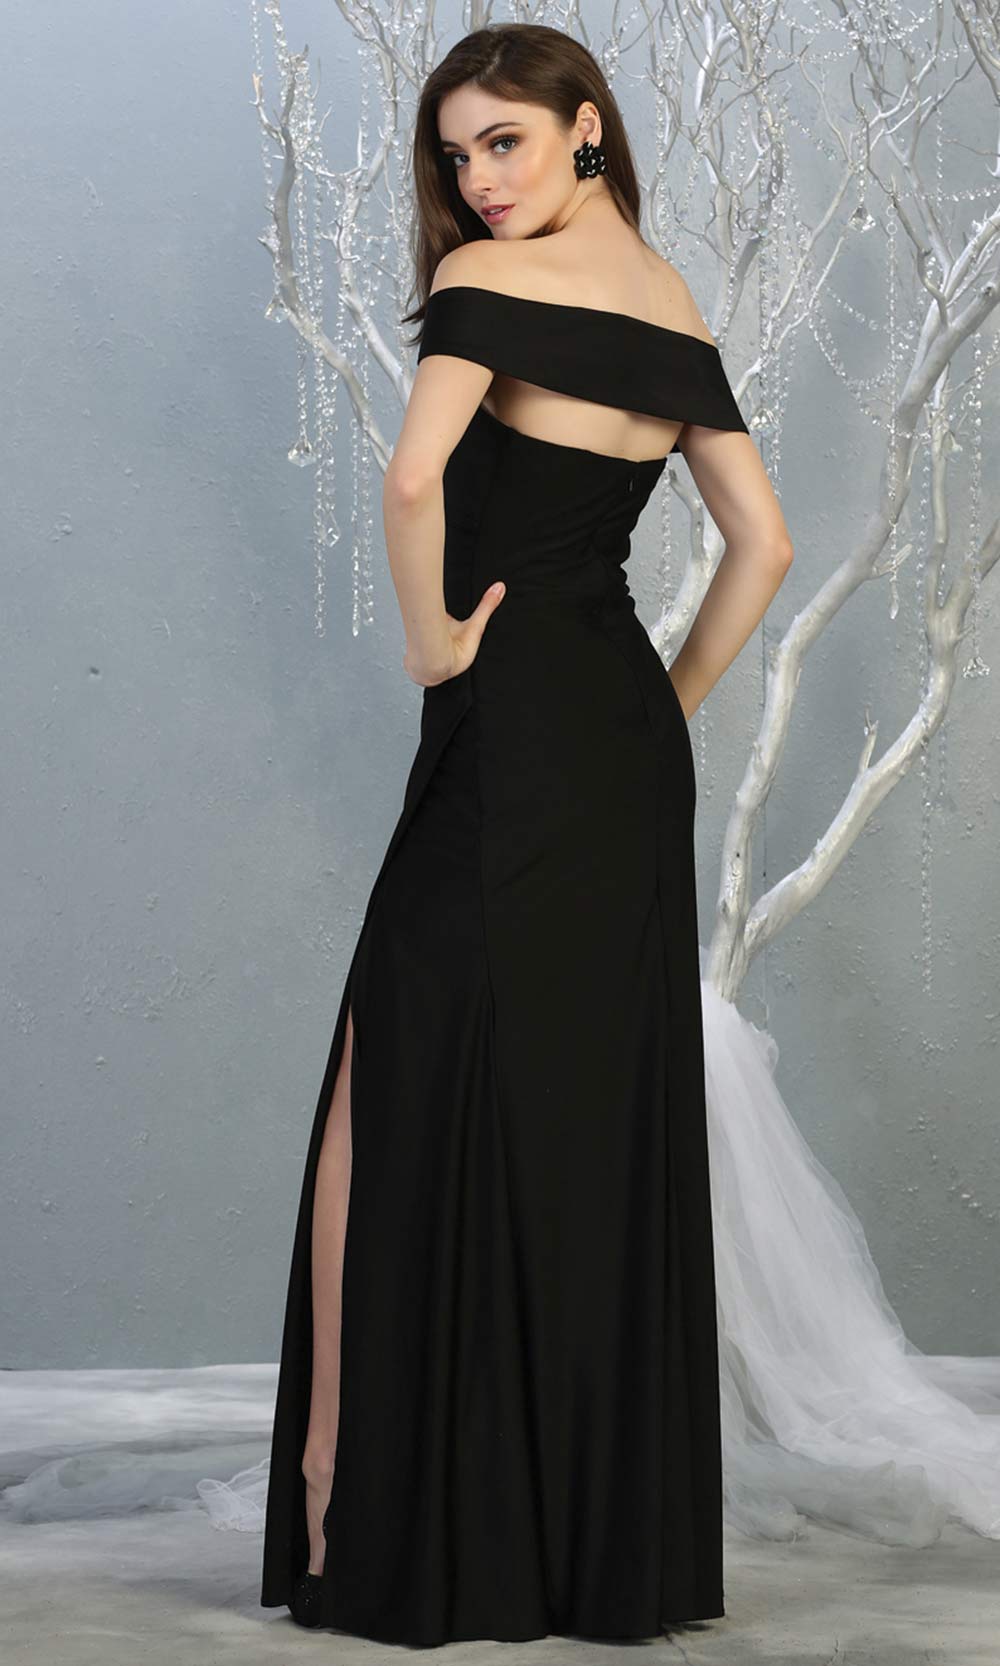 Mayqueen MQ1825 long black off shoulder fitted bridesmaid dress w/high slit. Full length black sleek & sexy gown is perfect for enagagement/e-shoot dress, formal wedding guest, indowestern gown, evening party dress, prom, bridesmaid.Plus sizes avail-b.jpg